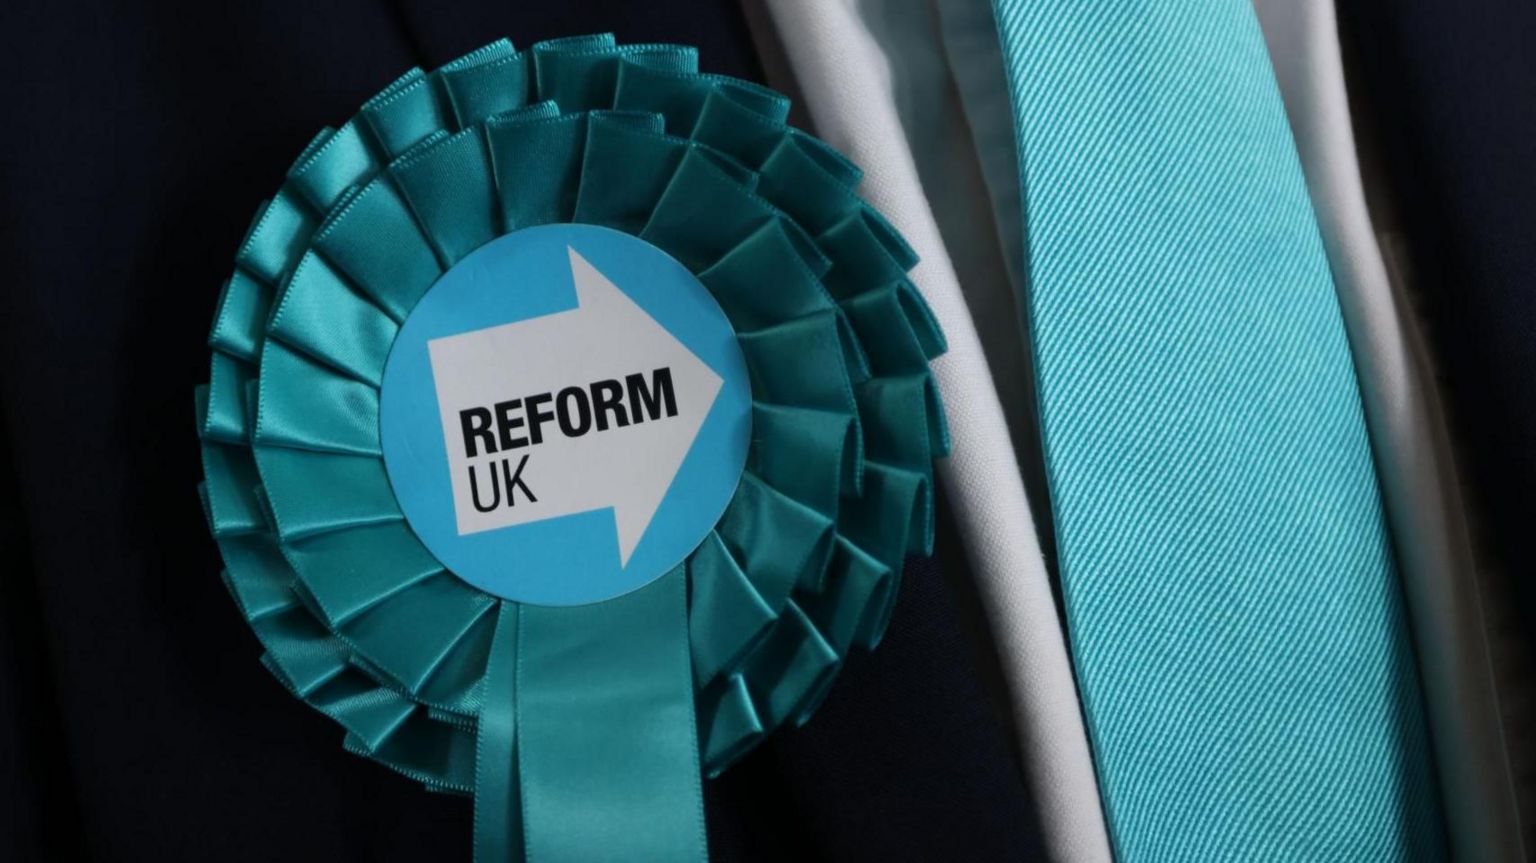 A stock image shows a Reform Party logo on a rosette on someone's chest